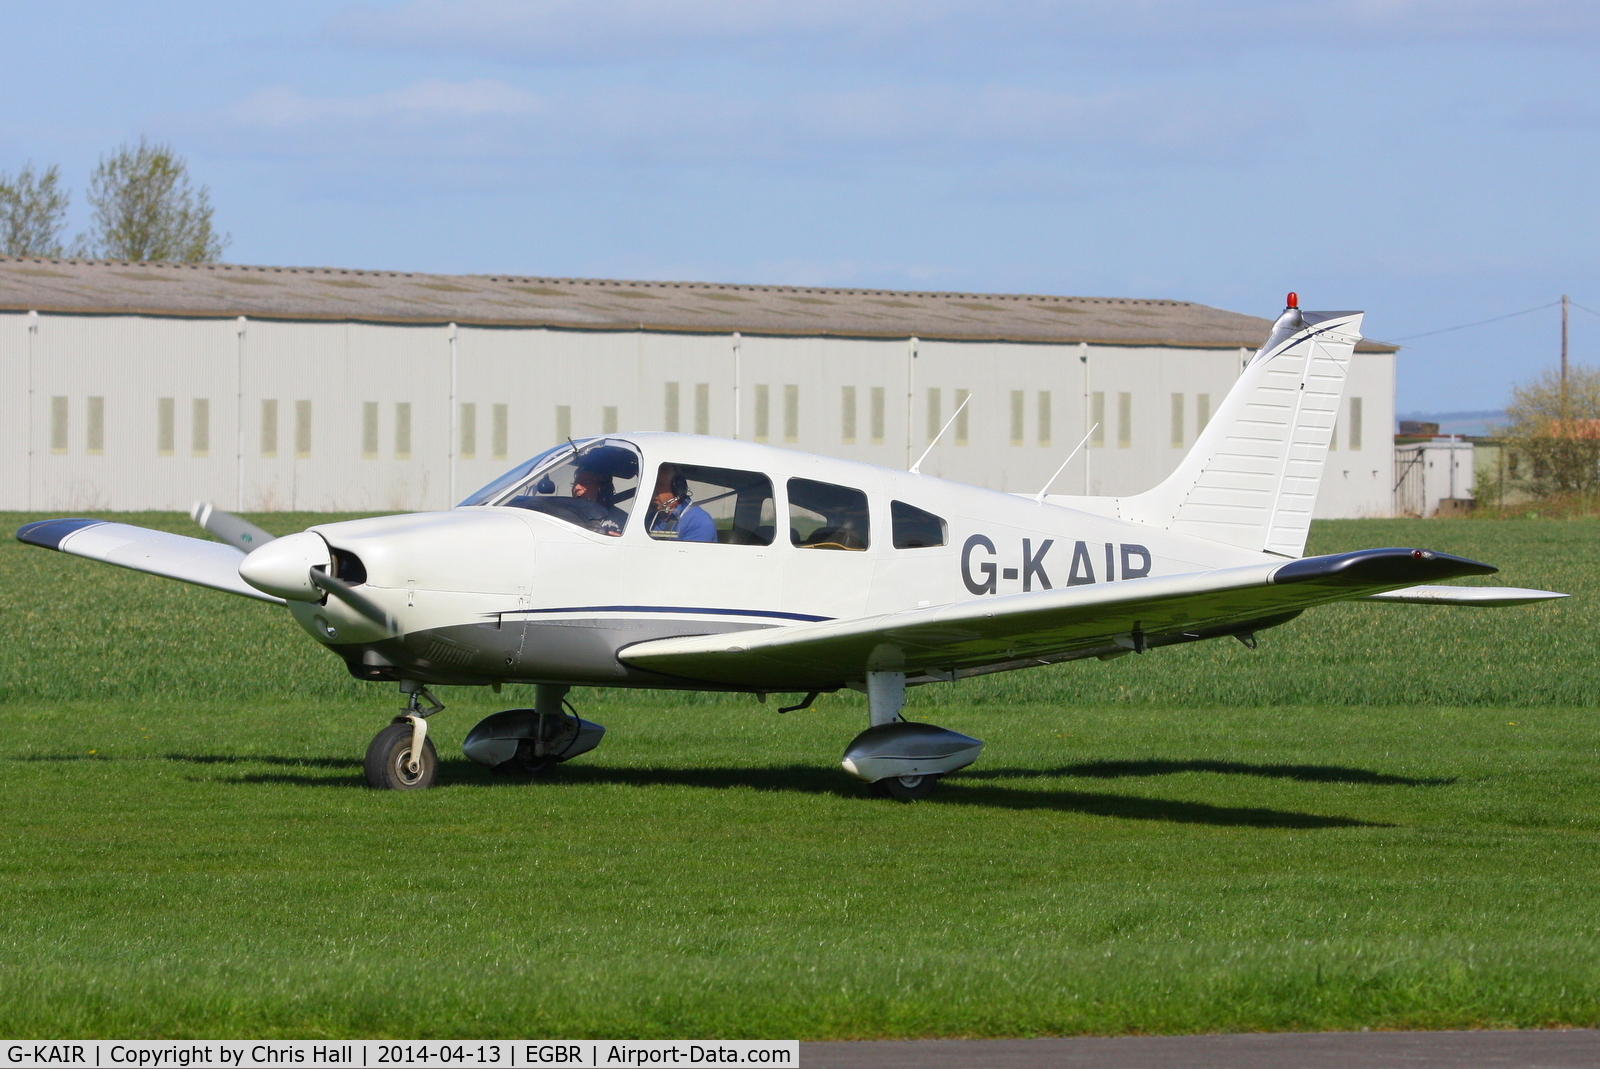 G-KAIR, 1978 Piper PA-28-181 Cherokee Archer II C/N 28-7990176, at Breighton's 'Early Bird' Fly-in 13/04/14